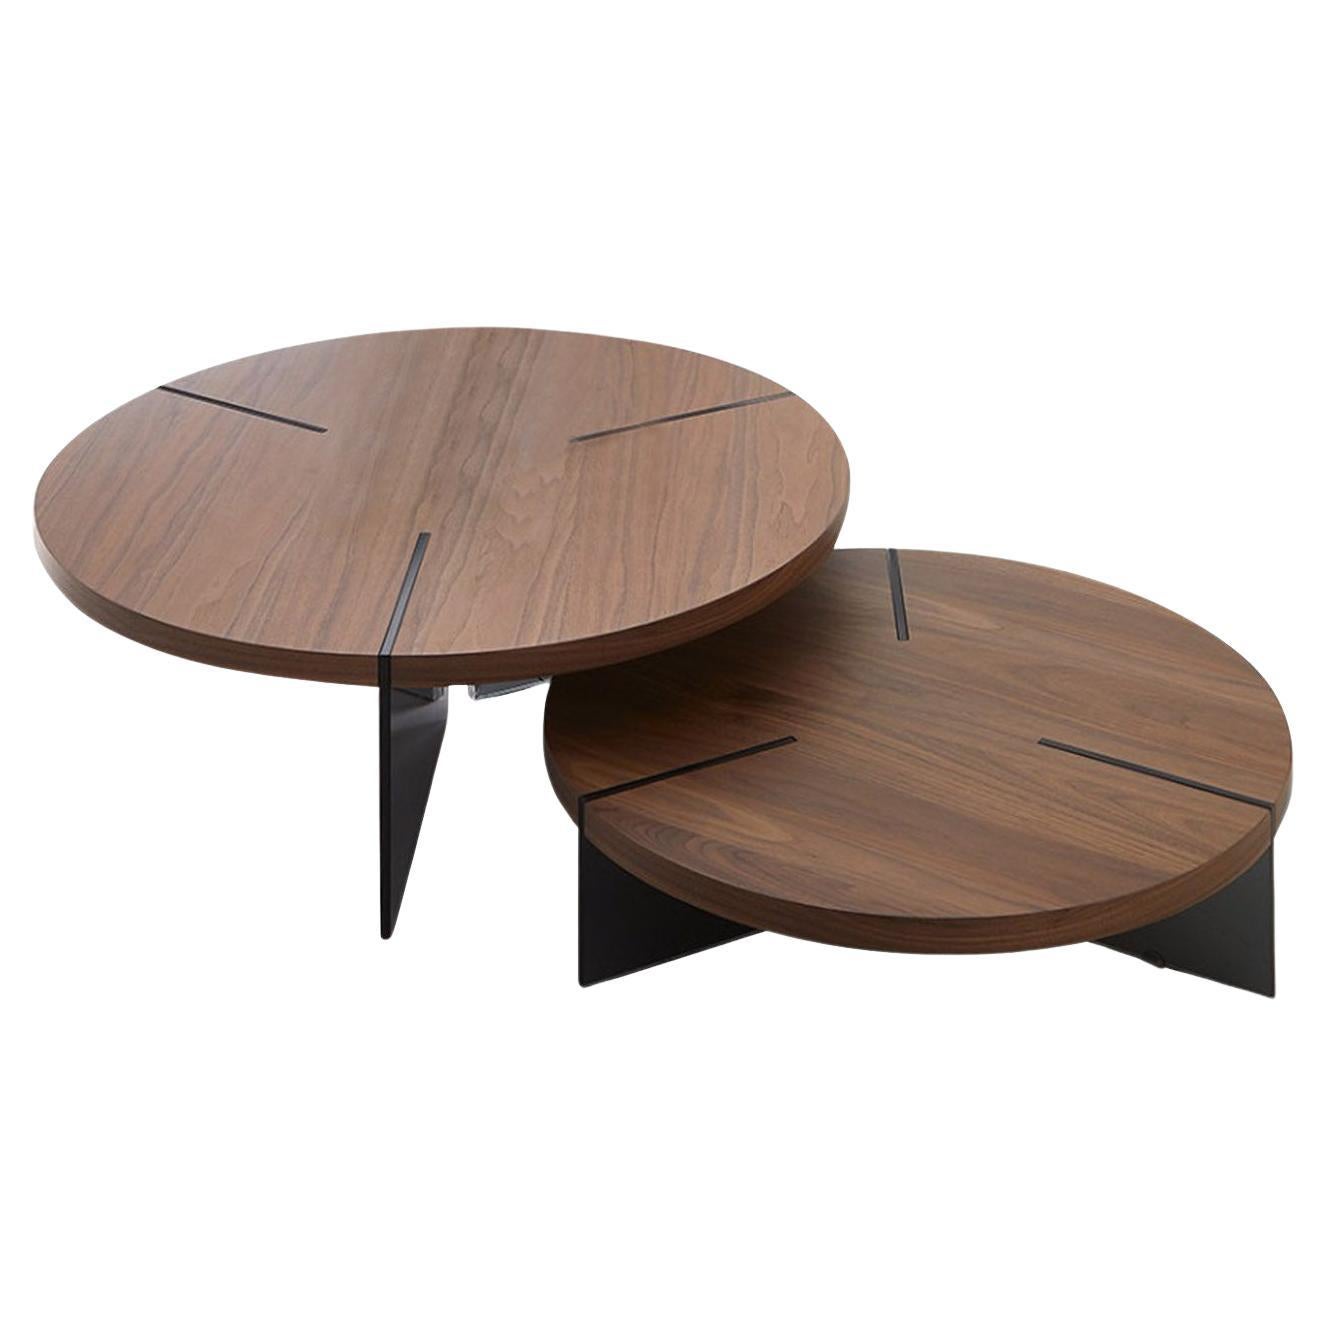 Set of 2 Work Coffee Tables For Sale